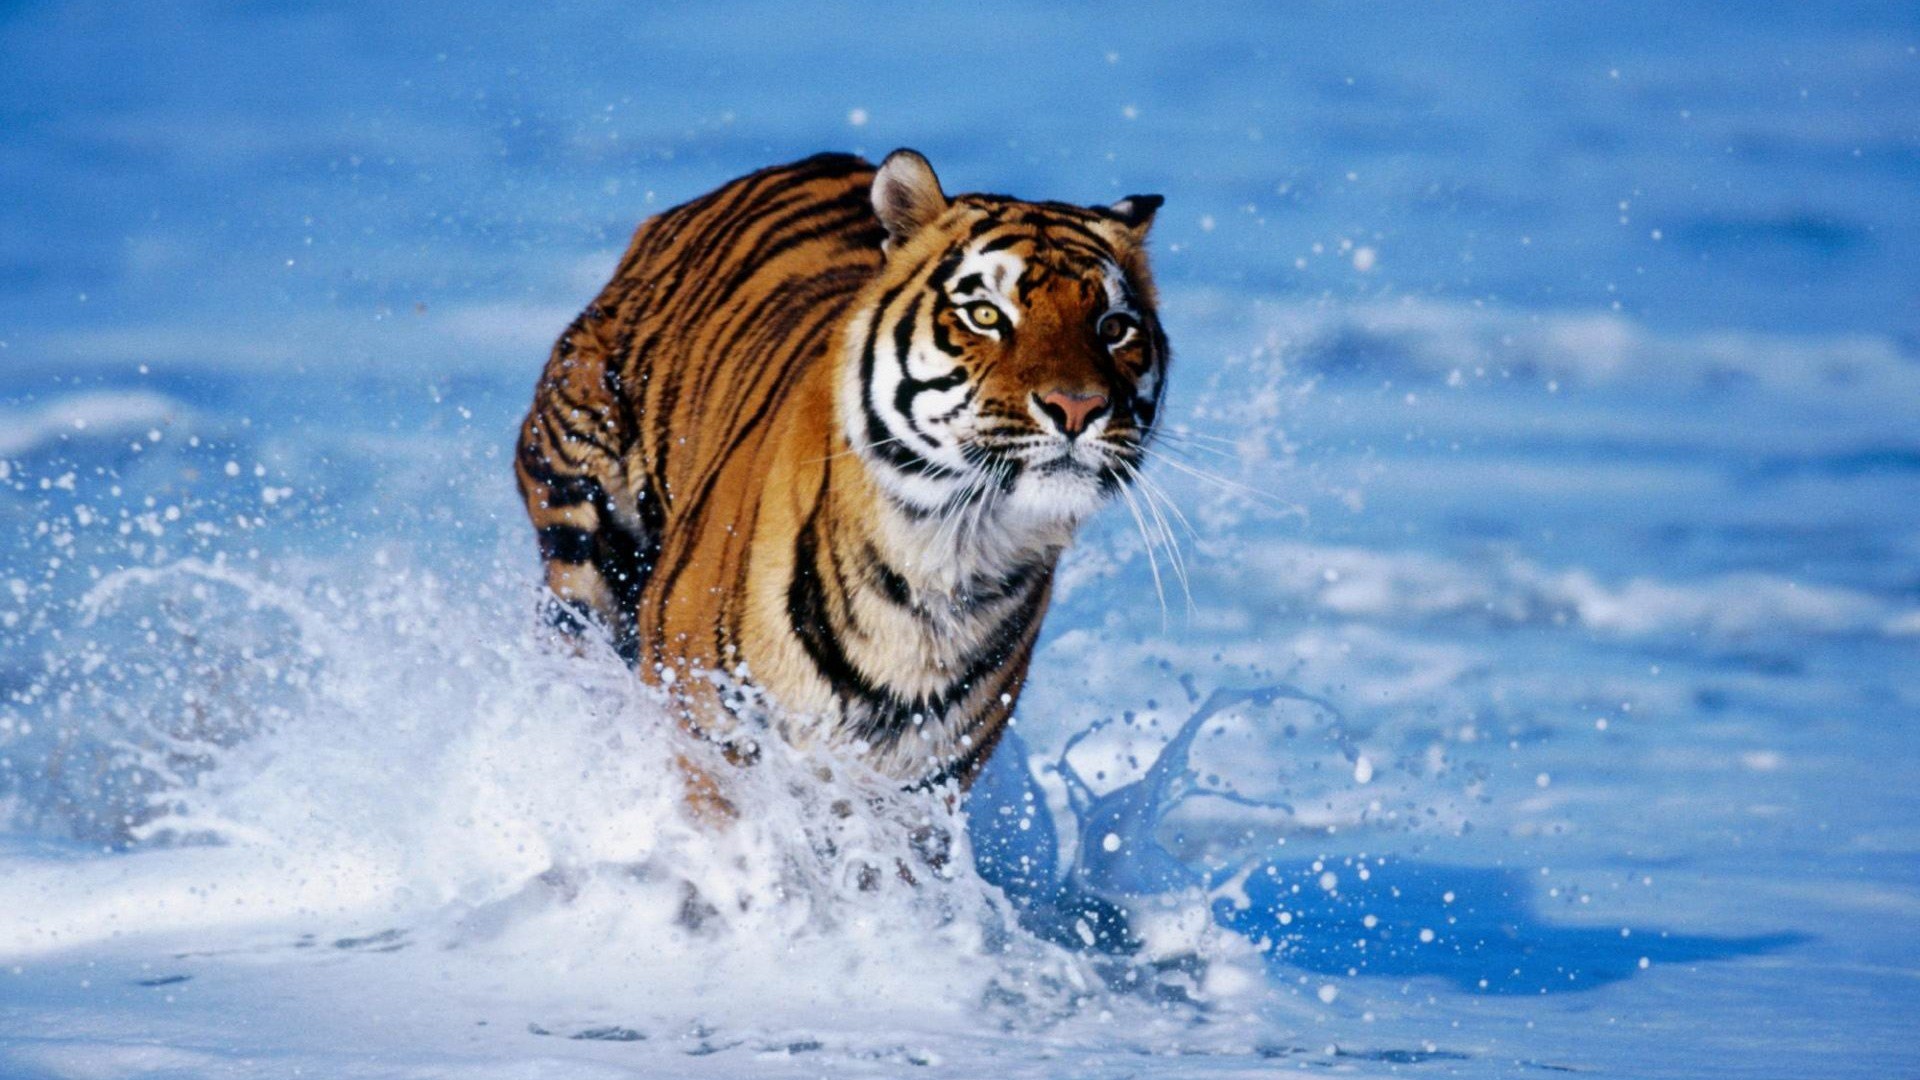 Animal-pictures-tiger-wallpapers-hd-photos-tiger-wallpaper